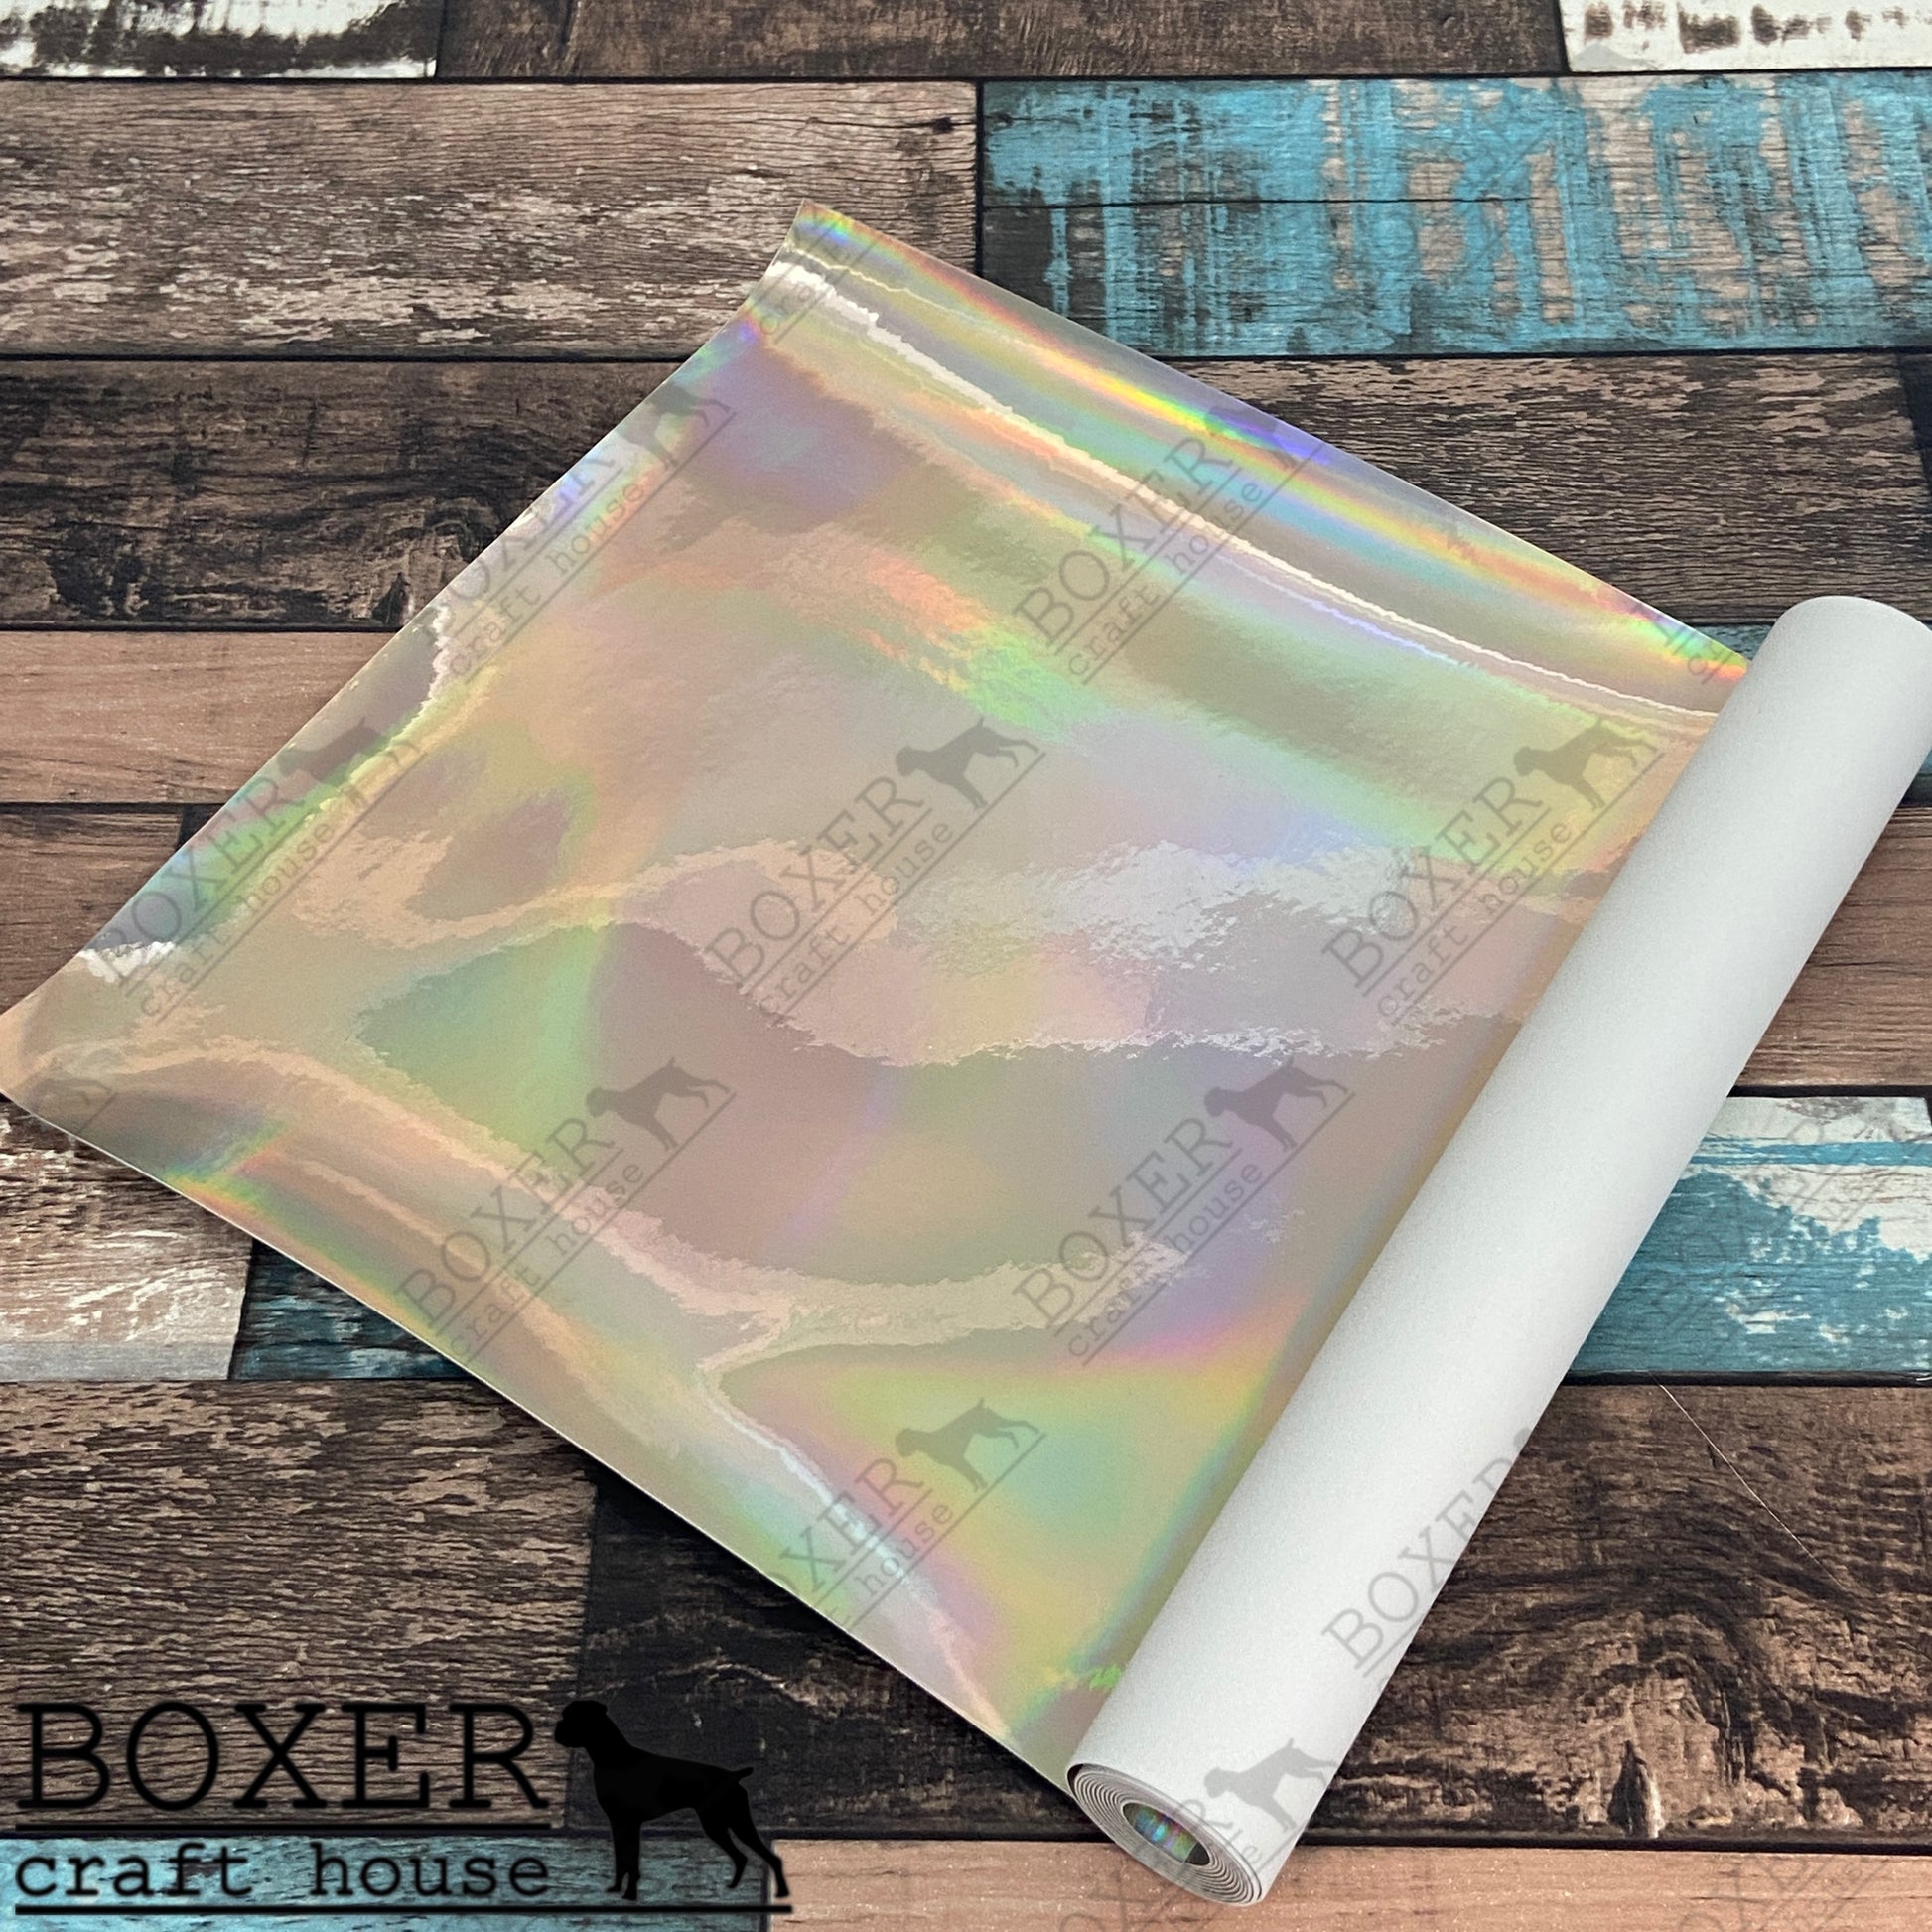 Holo, Holographic Faux Leather, Holographic Vinyl, Boxer Craft House Faux Leather, Embroidery Vinyl, Sewing Vinyl, Ivory Holographic, Sewing with Faux Leather, Boxer Craft House